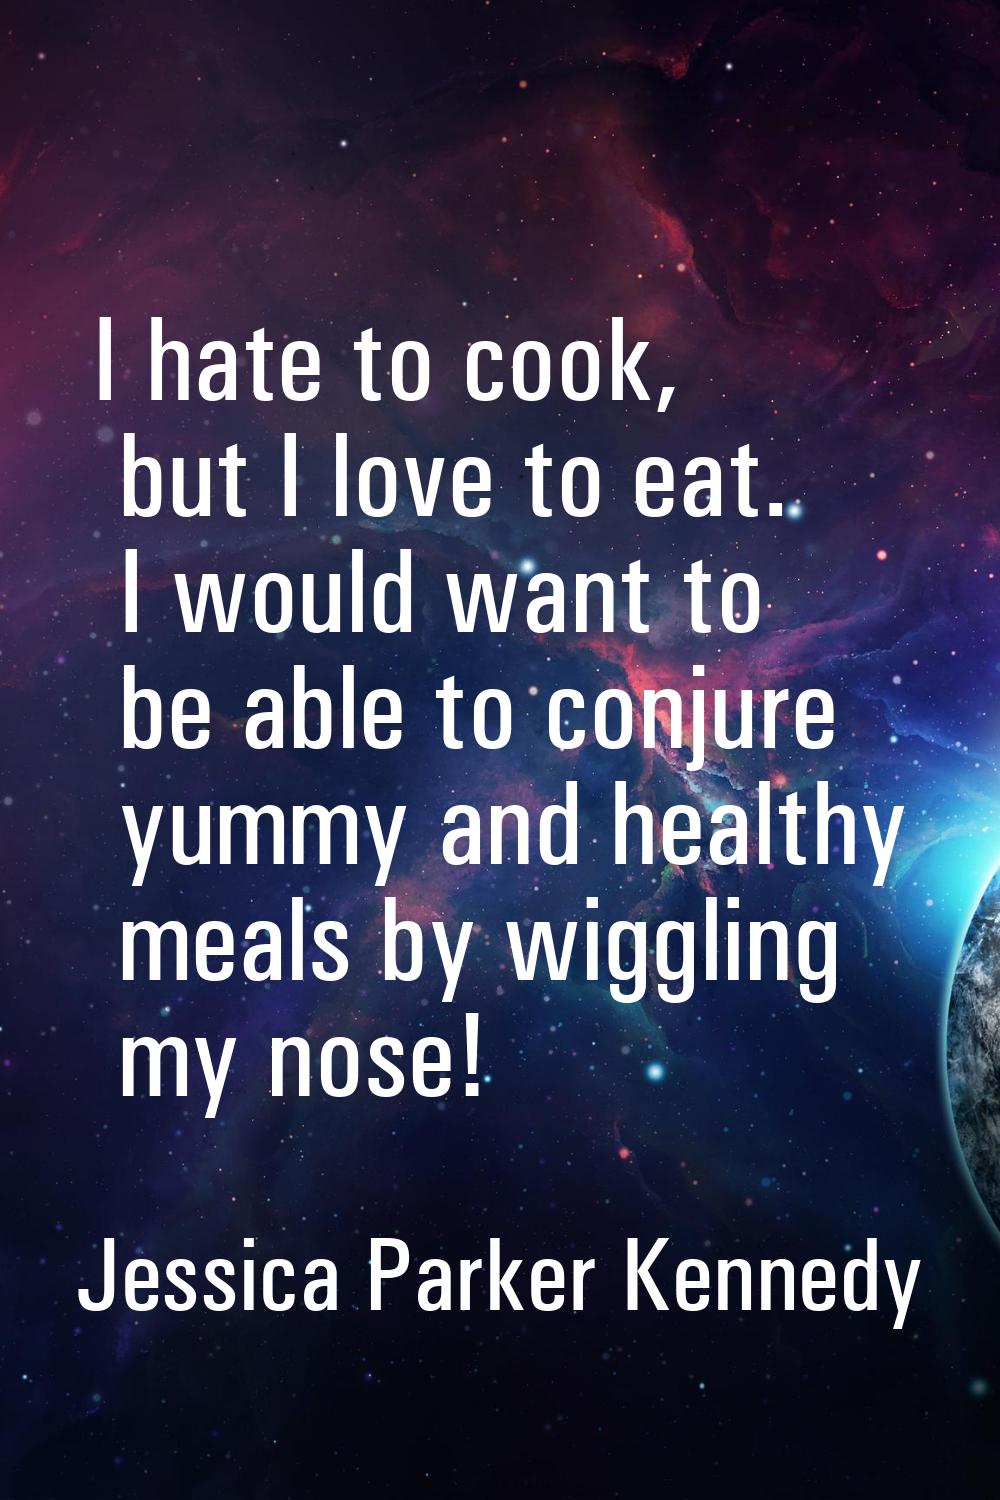 I hate to cook, but I love to eat. I would want to be able to conjure yummy and healthy meals by wi